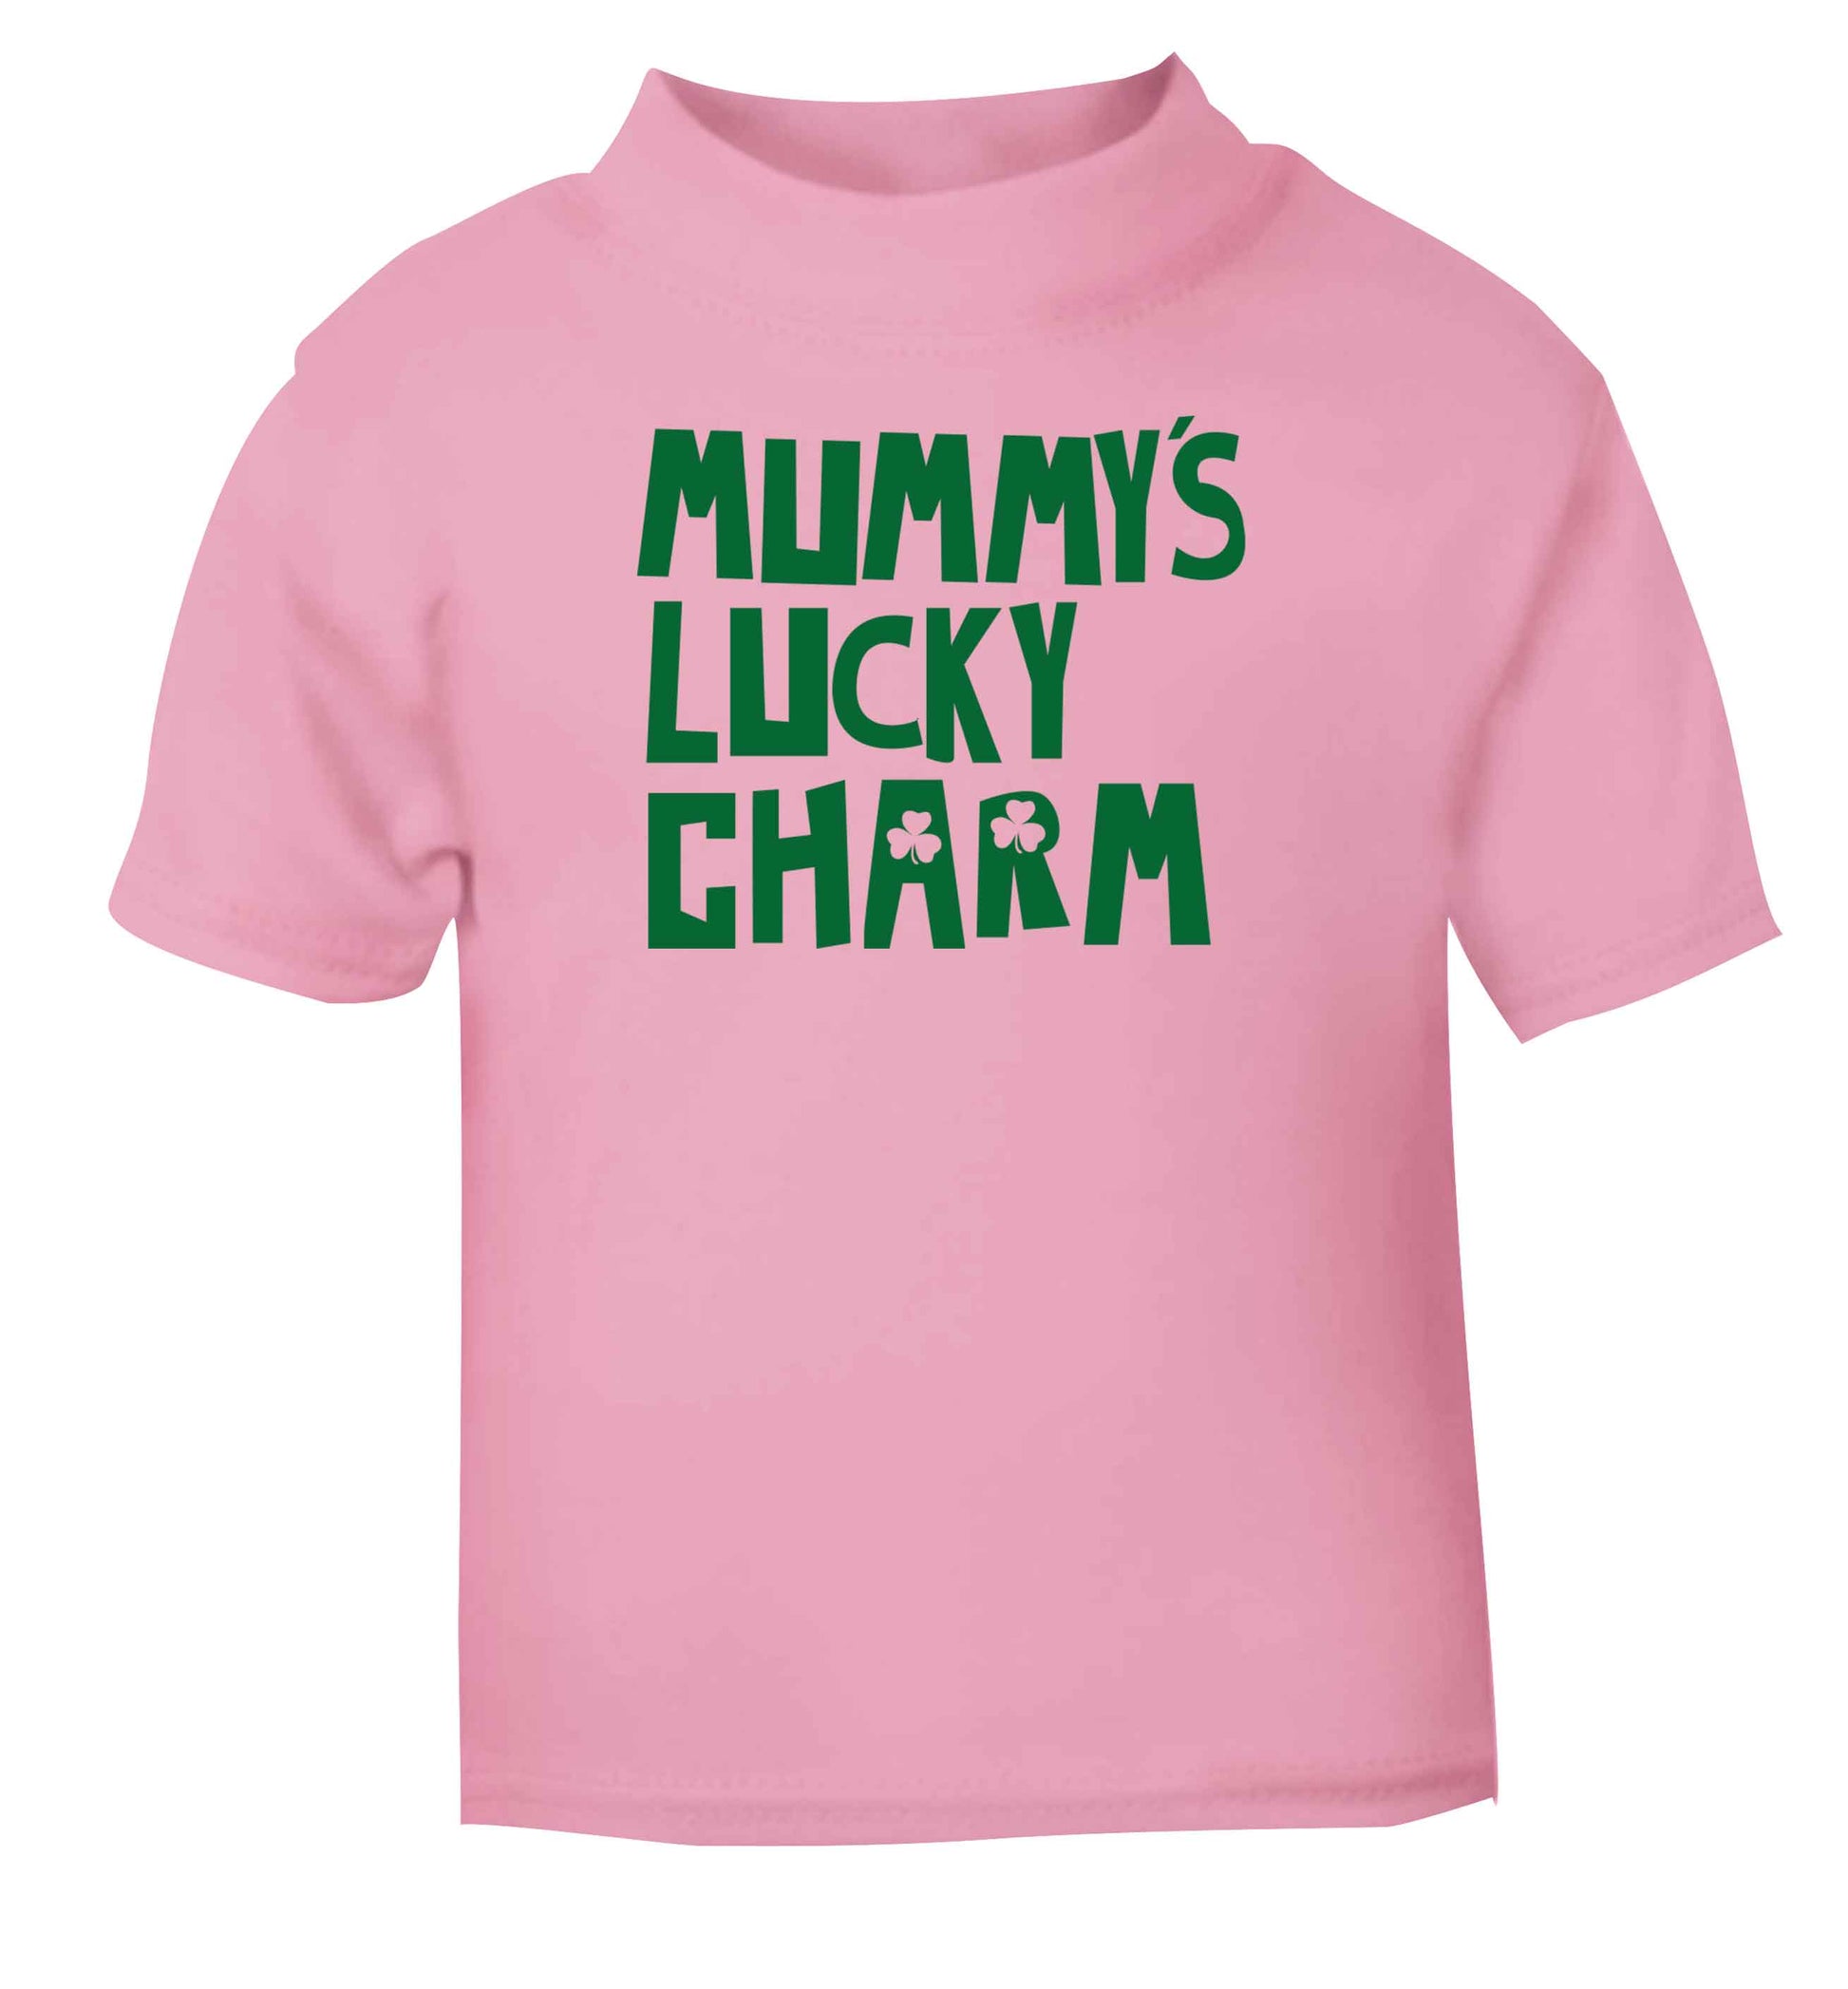 Mummy's lucky charm light pink baby toddler Tshirt 2 Years